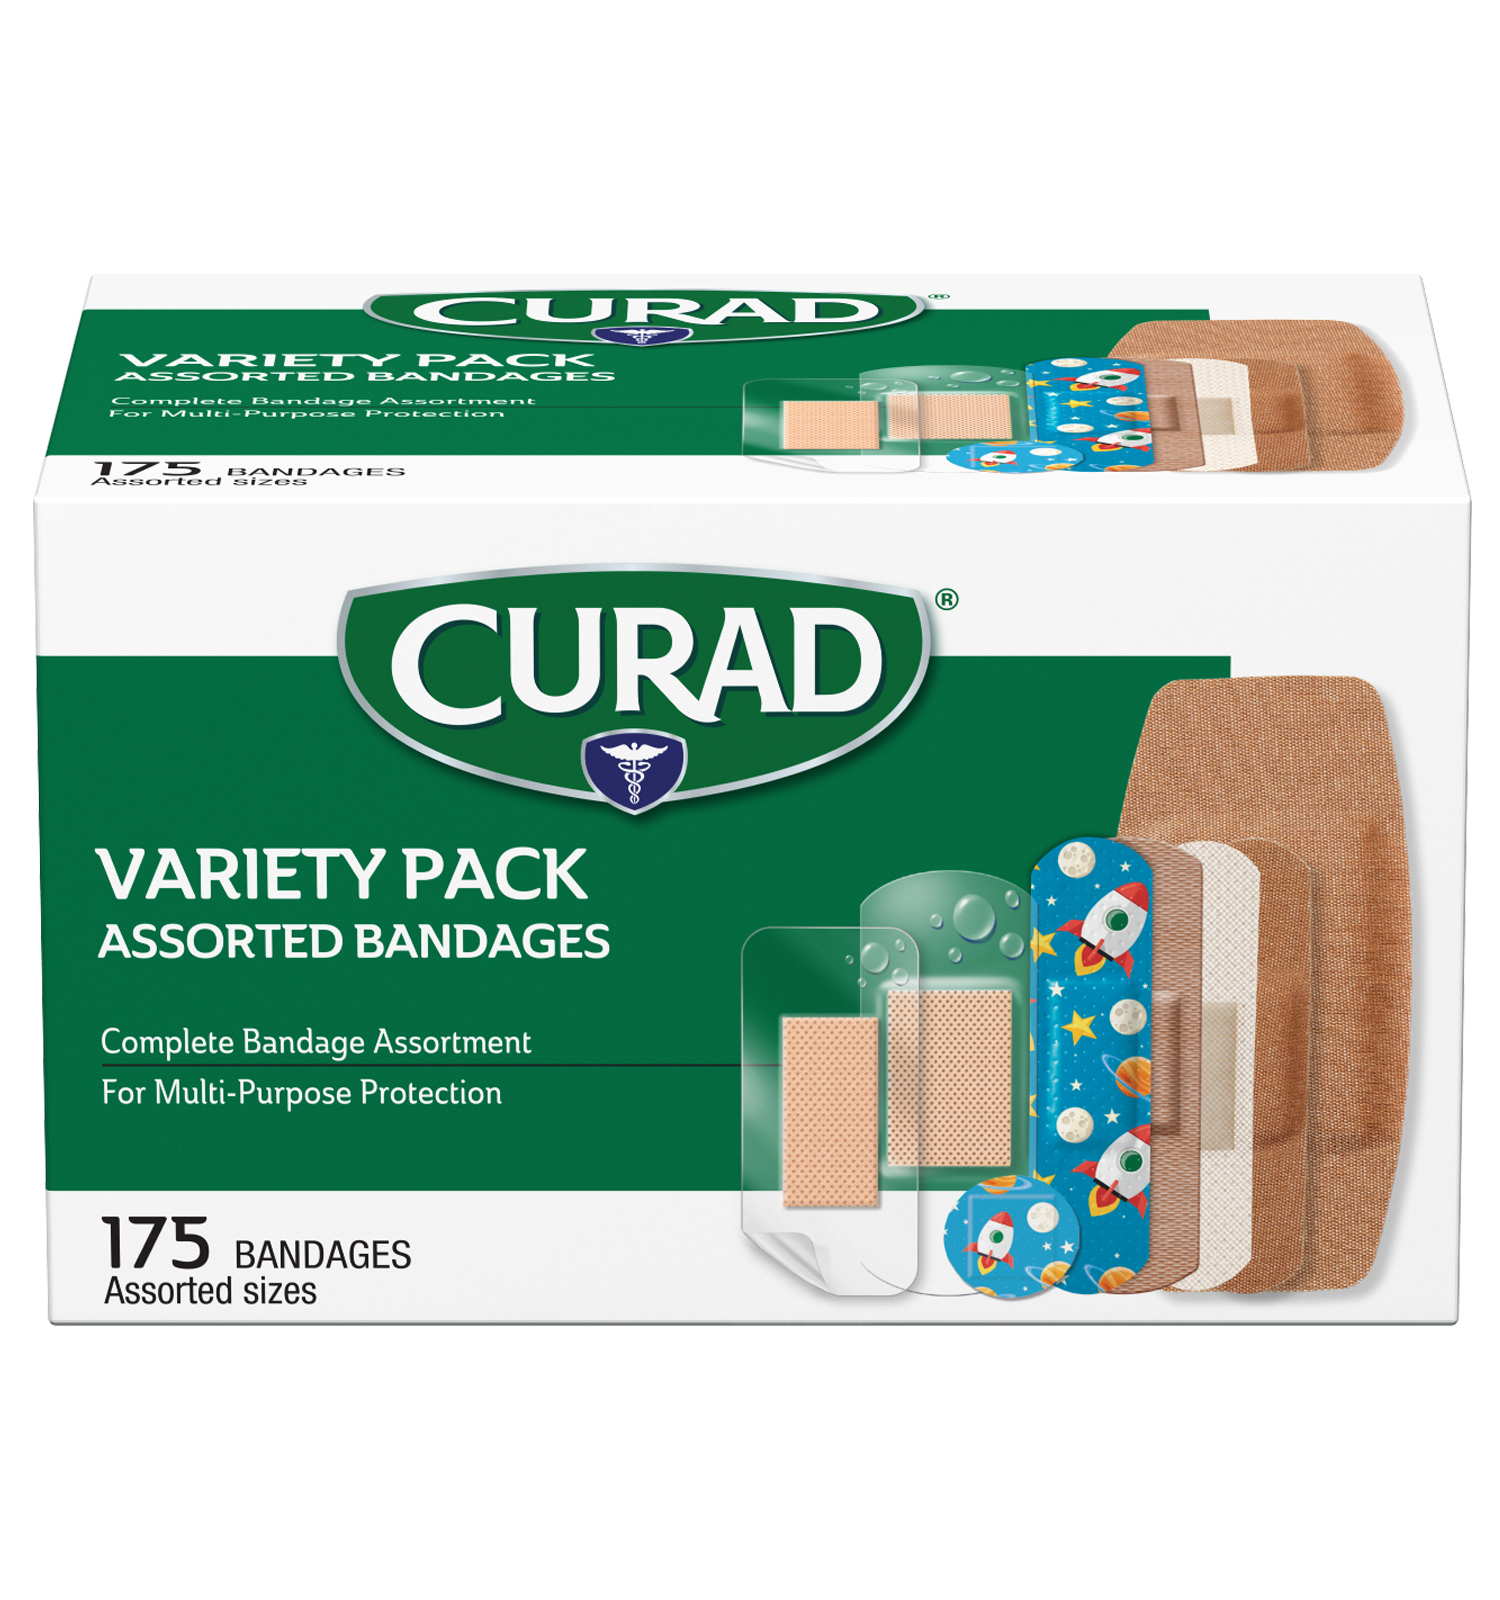 Family Variety Pack Bandages, Assorted Sizes, 175 count